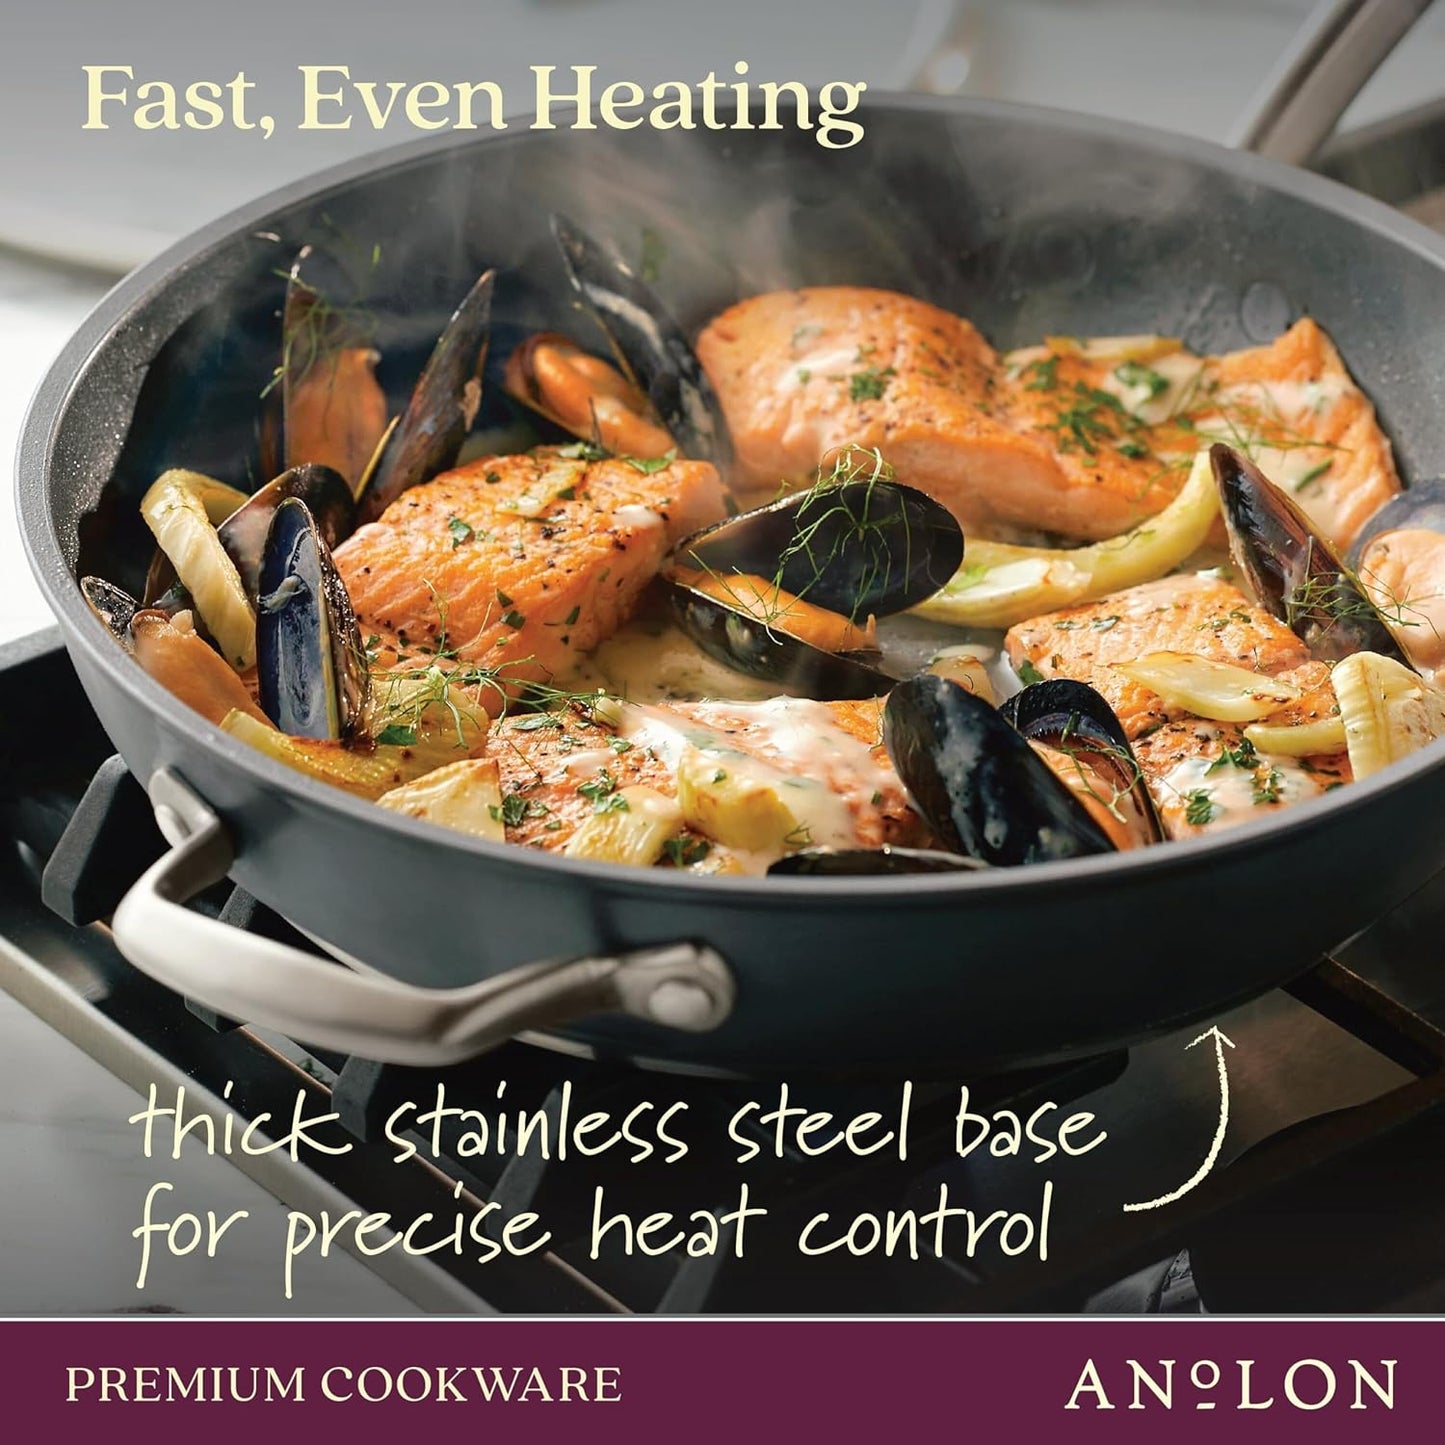 Anolon Accolade Forged Hard Anodized Nonstick Wok \/ Stir Fry Pan with Lid, 13.5 Inch - Moonstone Gray